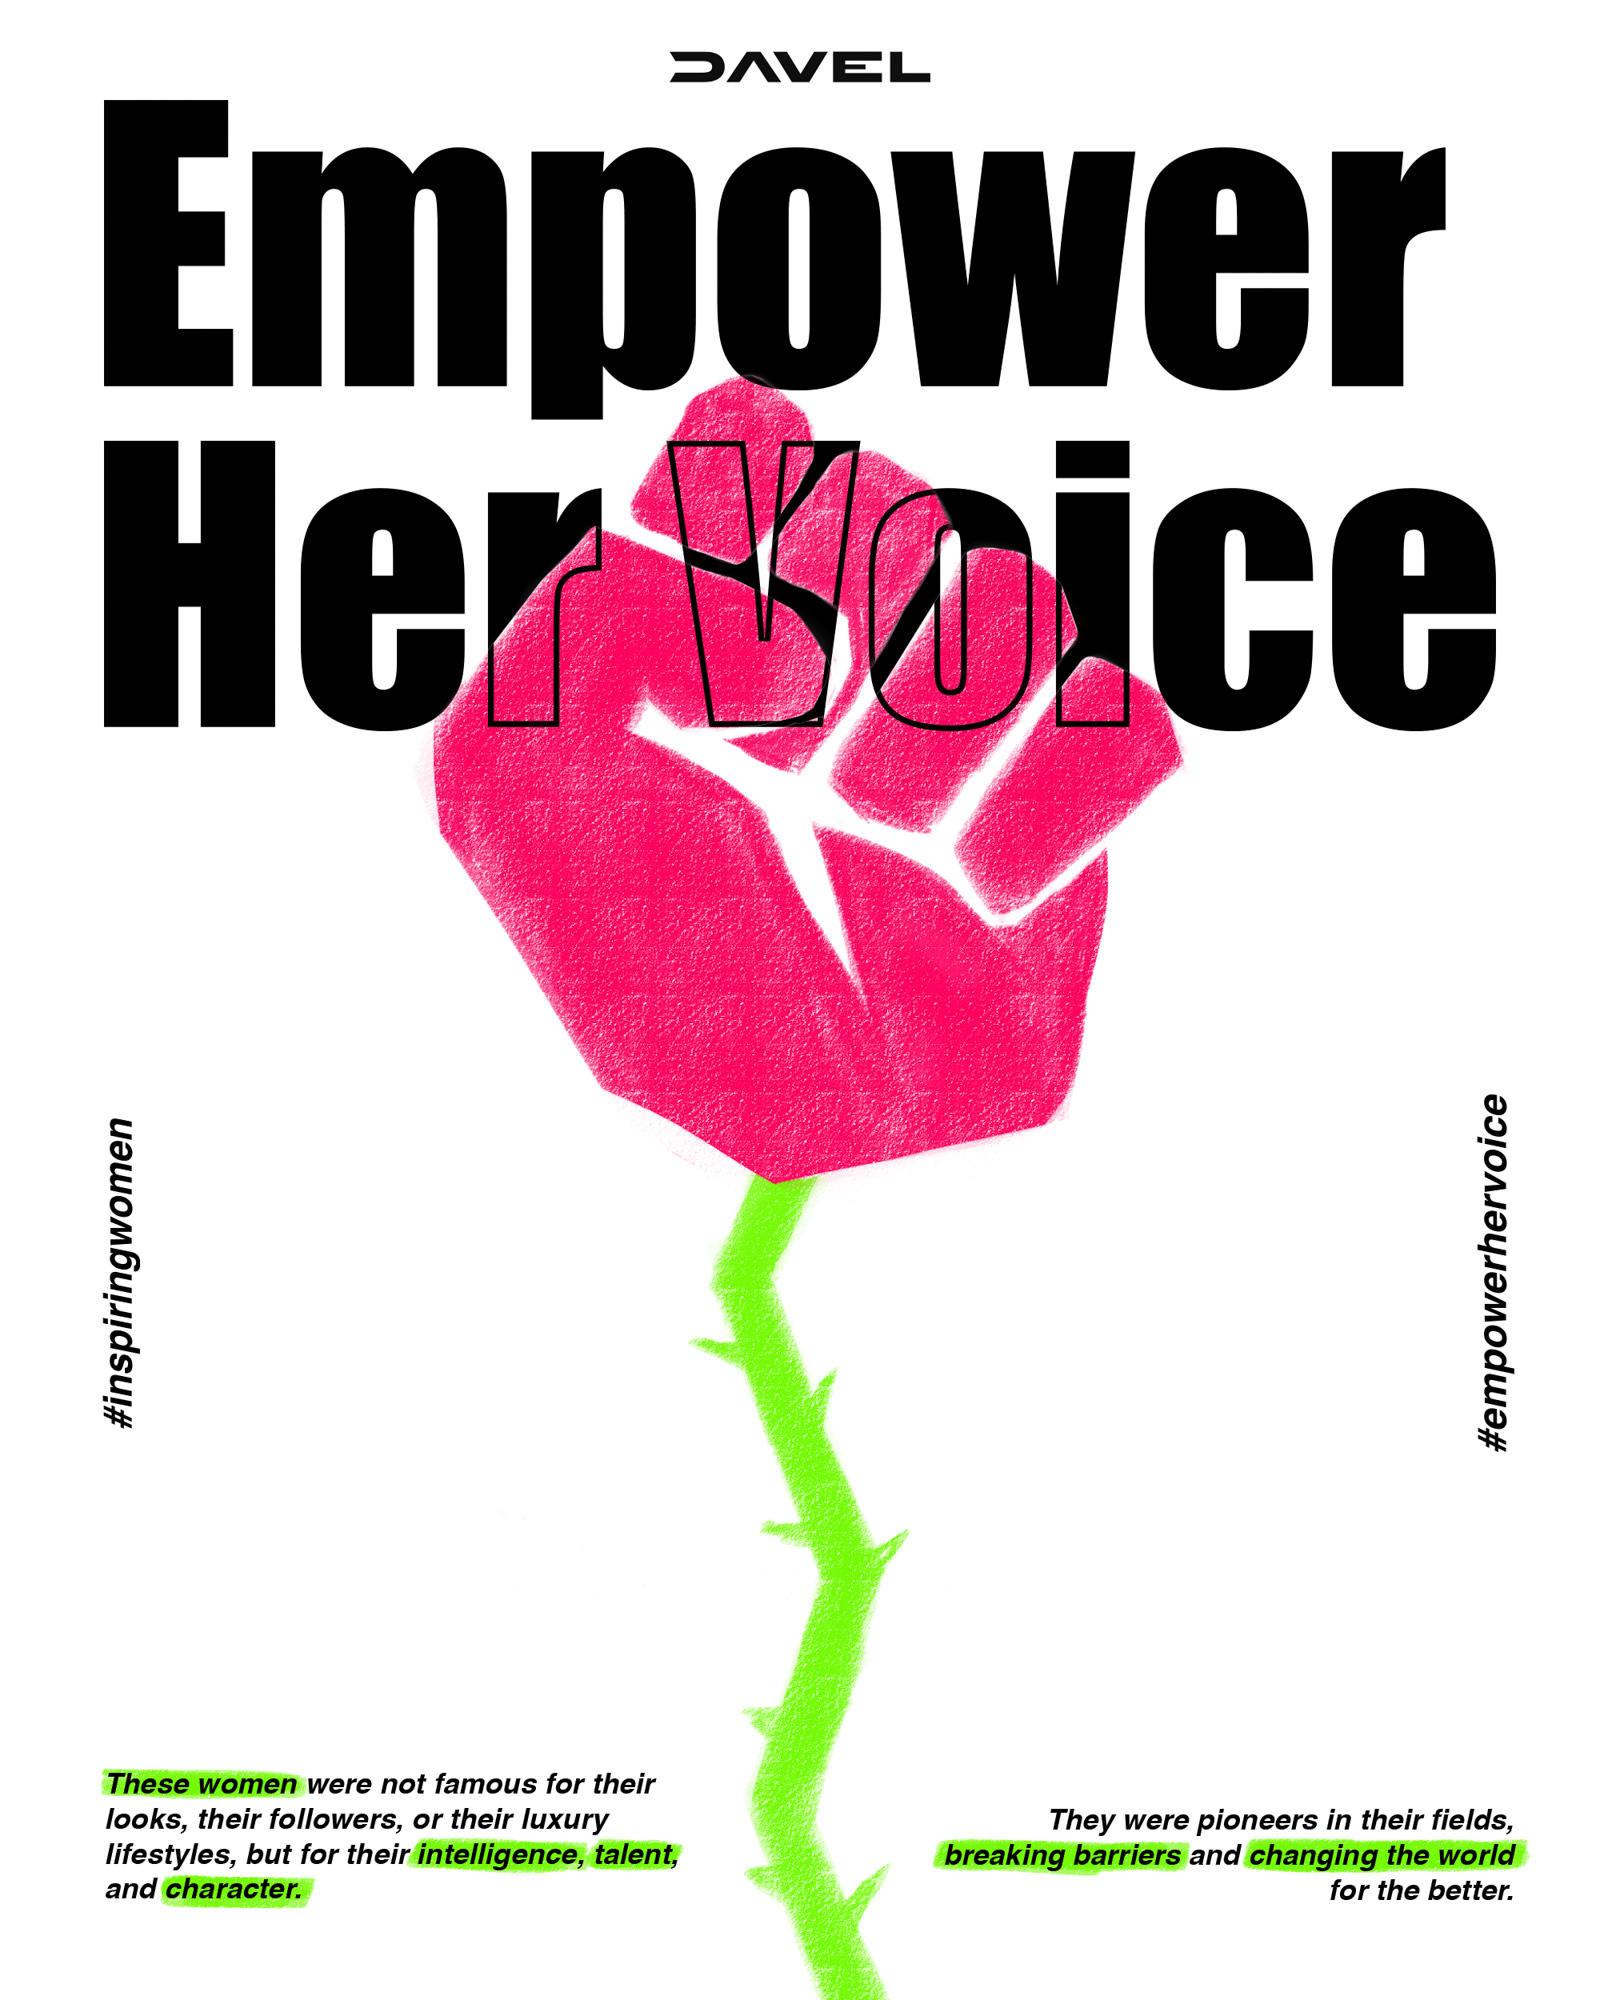 “Empower Her Voice” Campaign